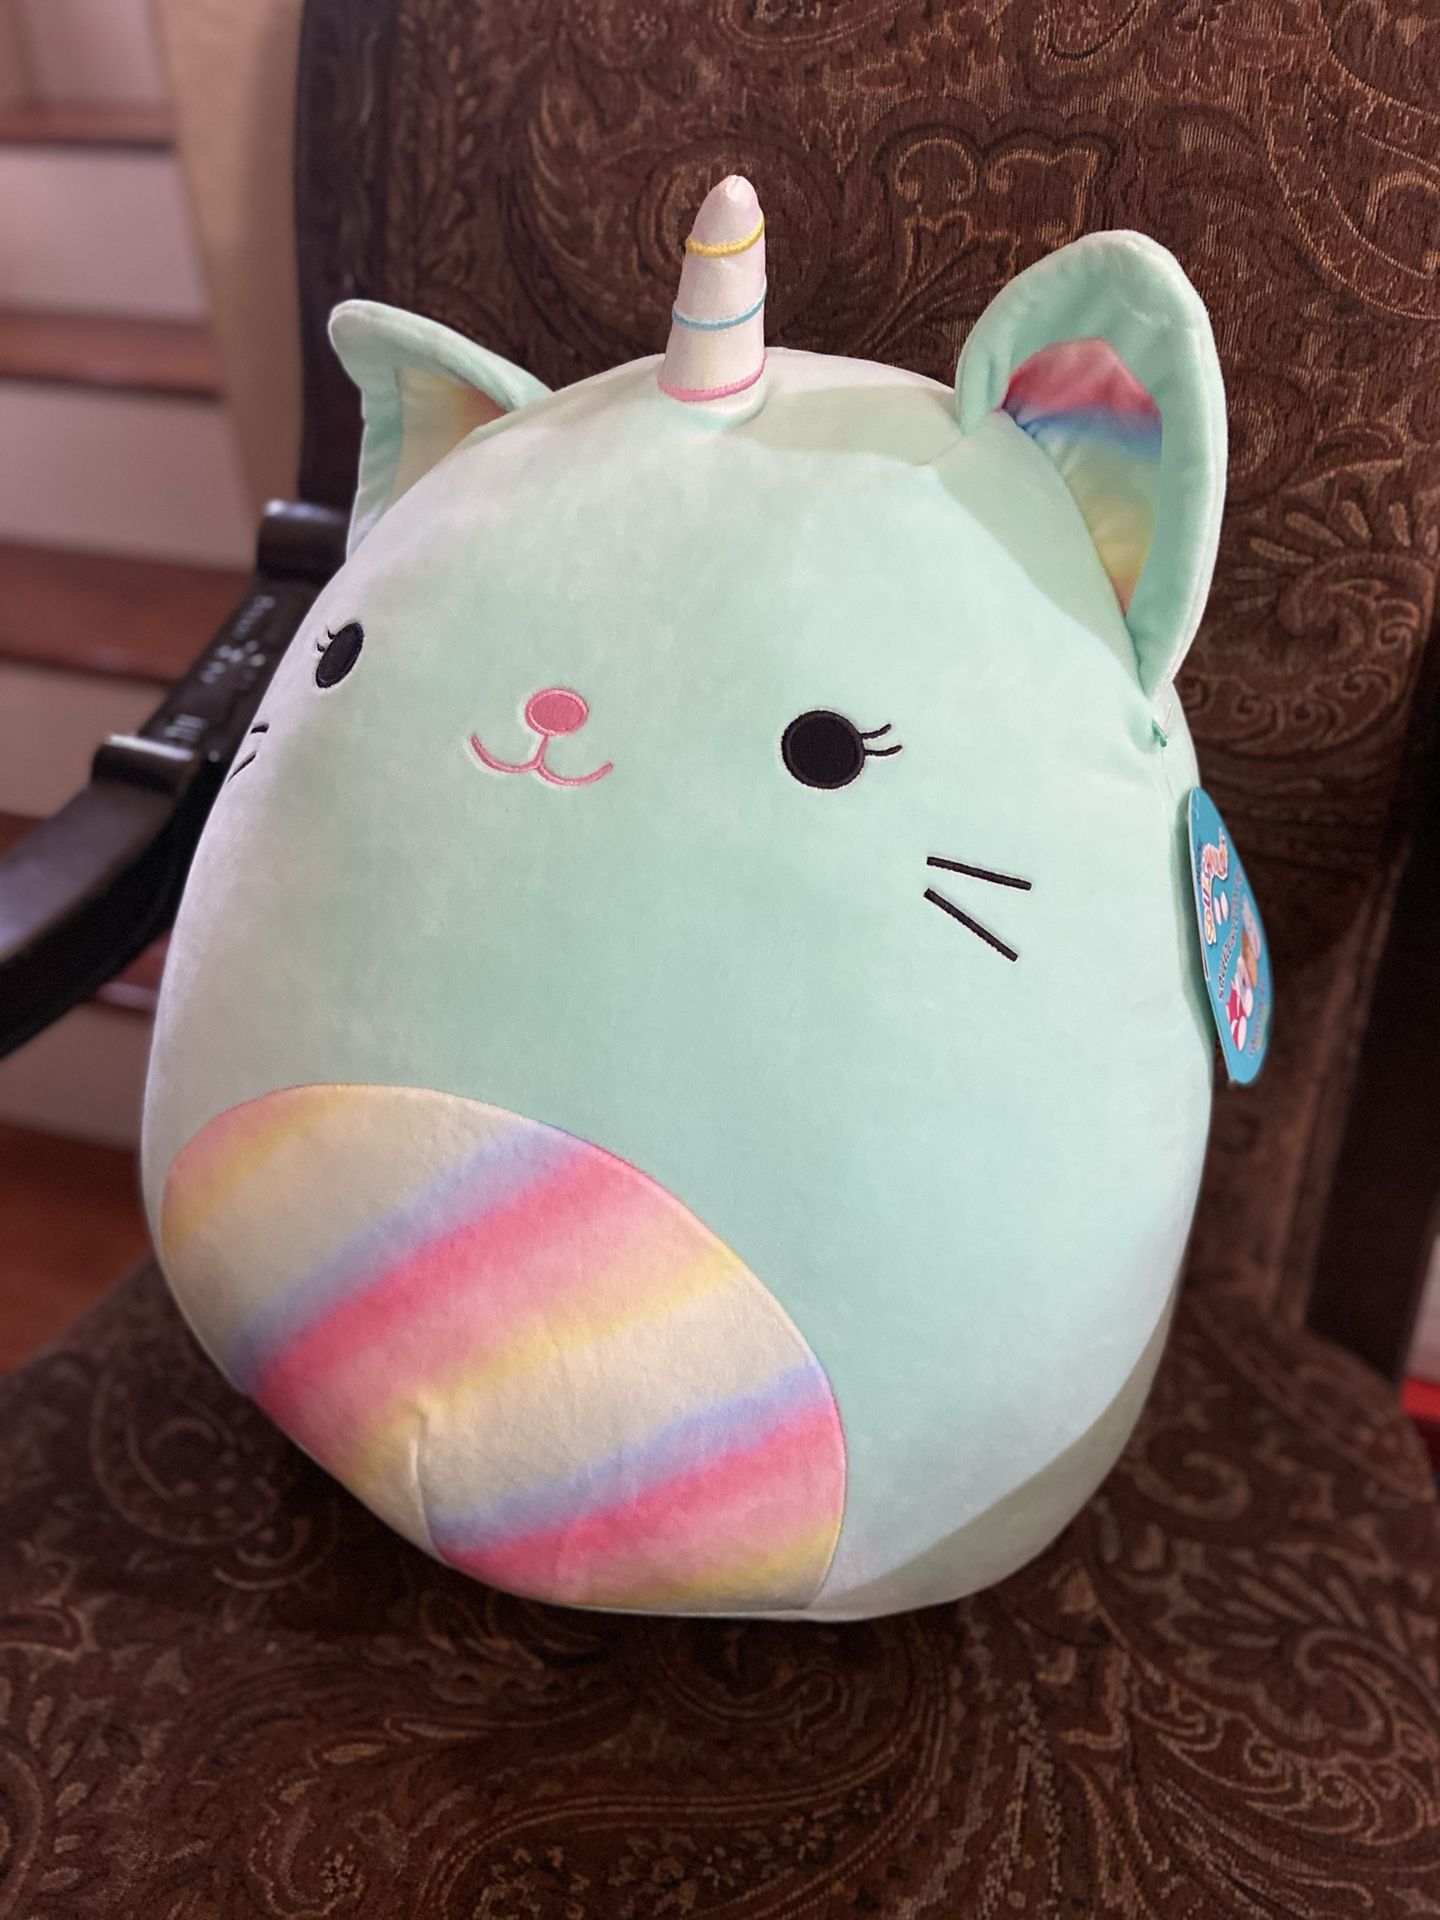 Squishmallows 16” plushi toy and pillow